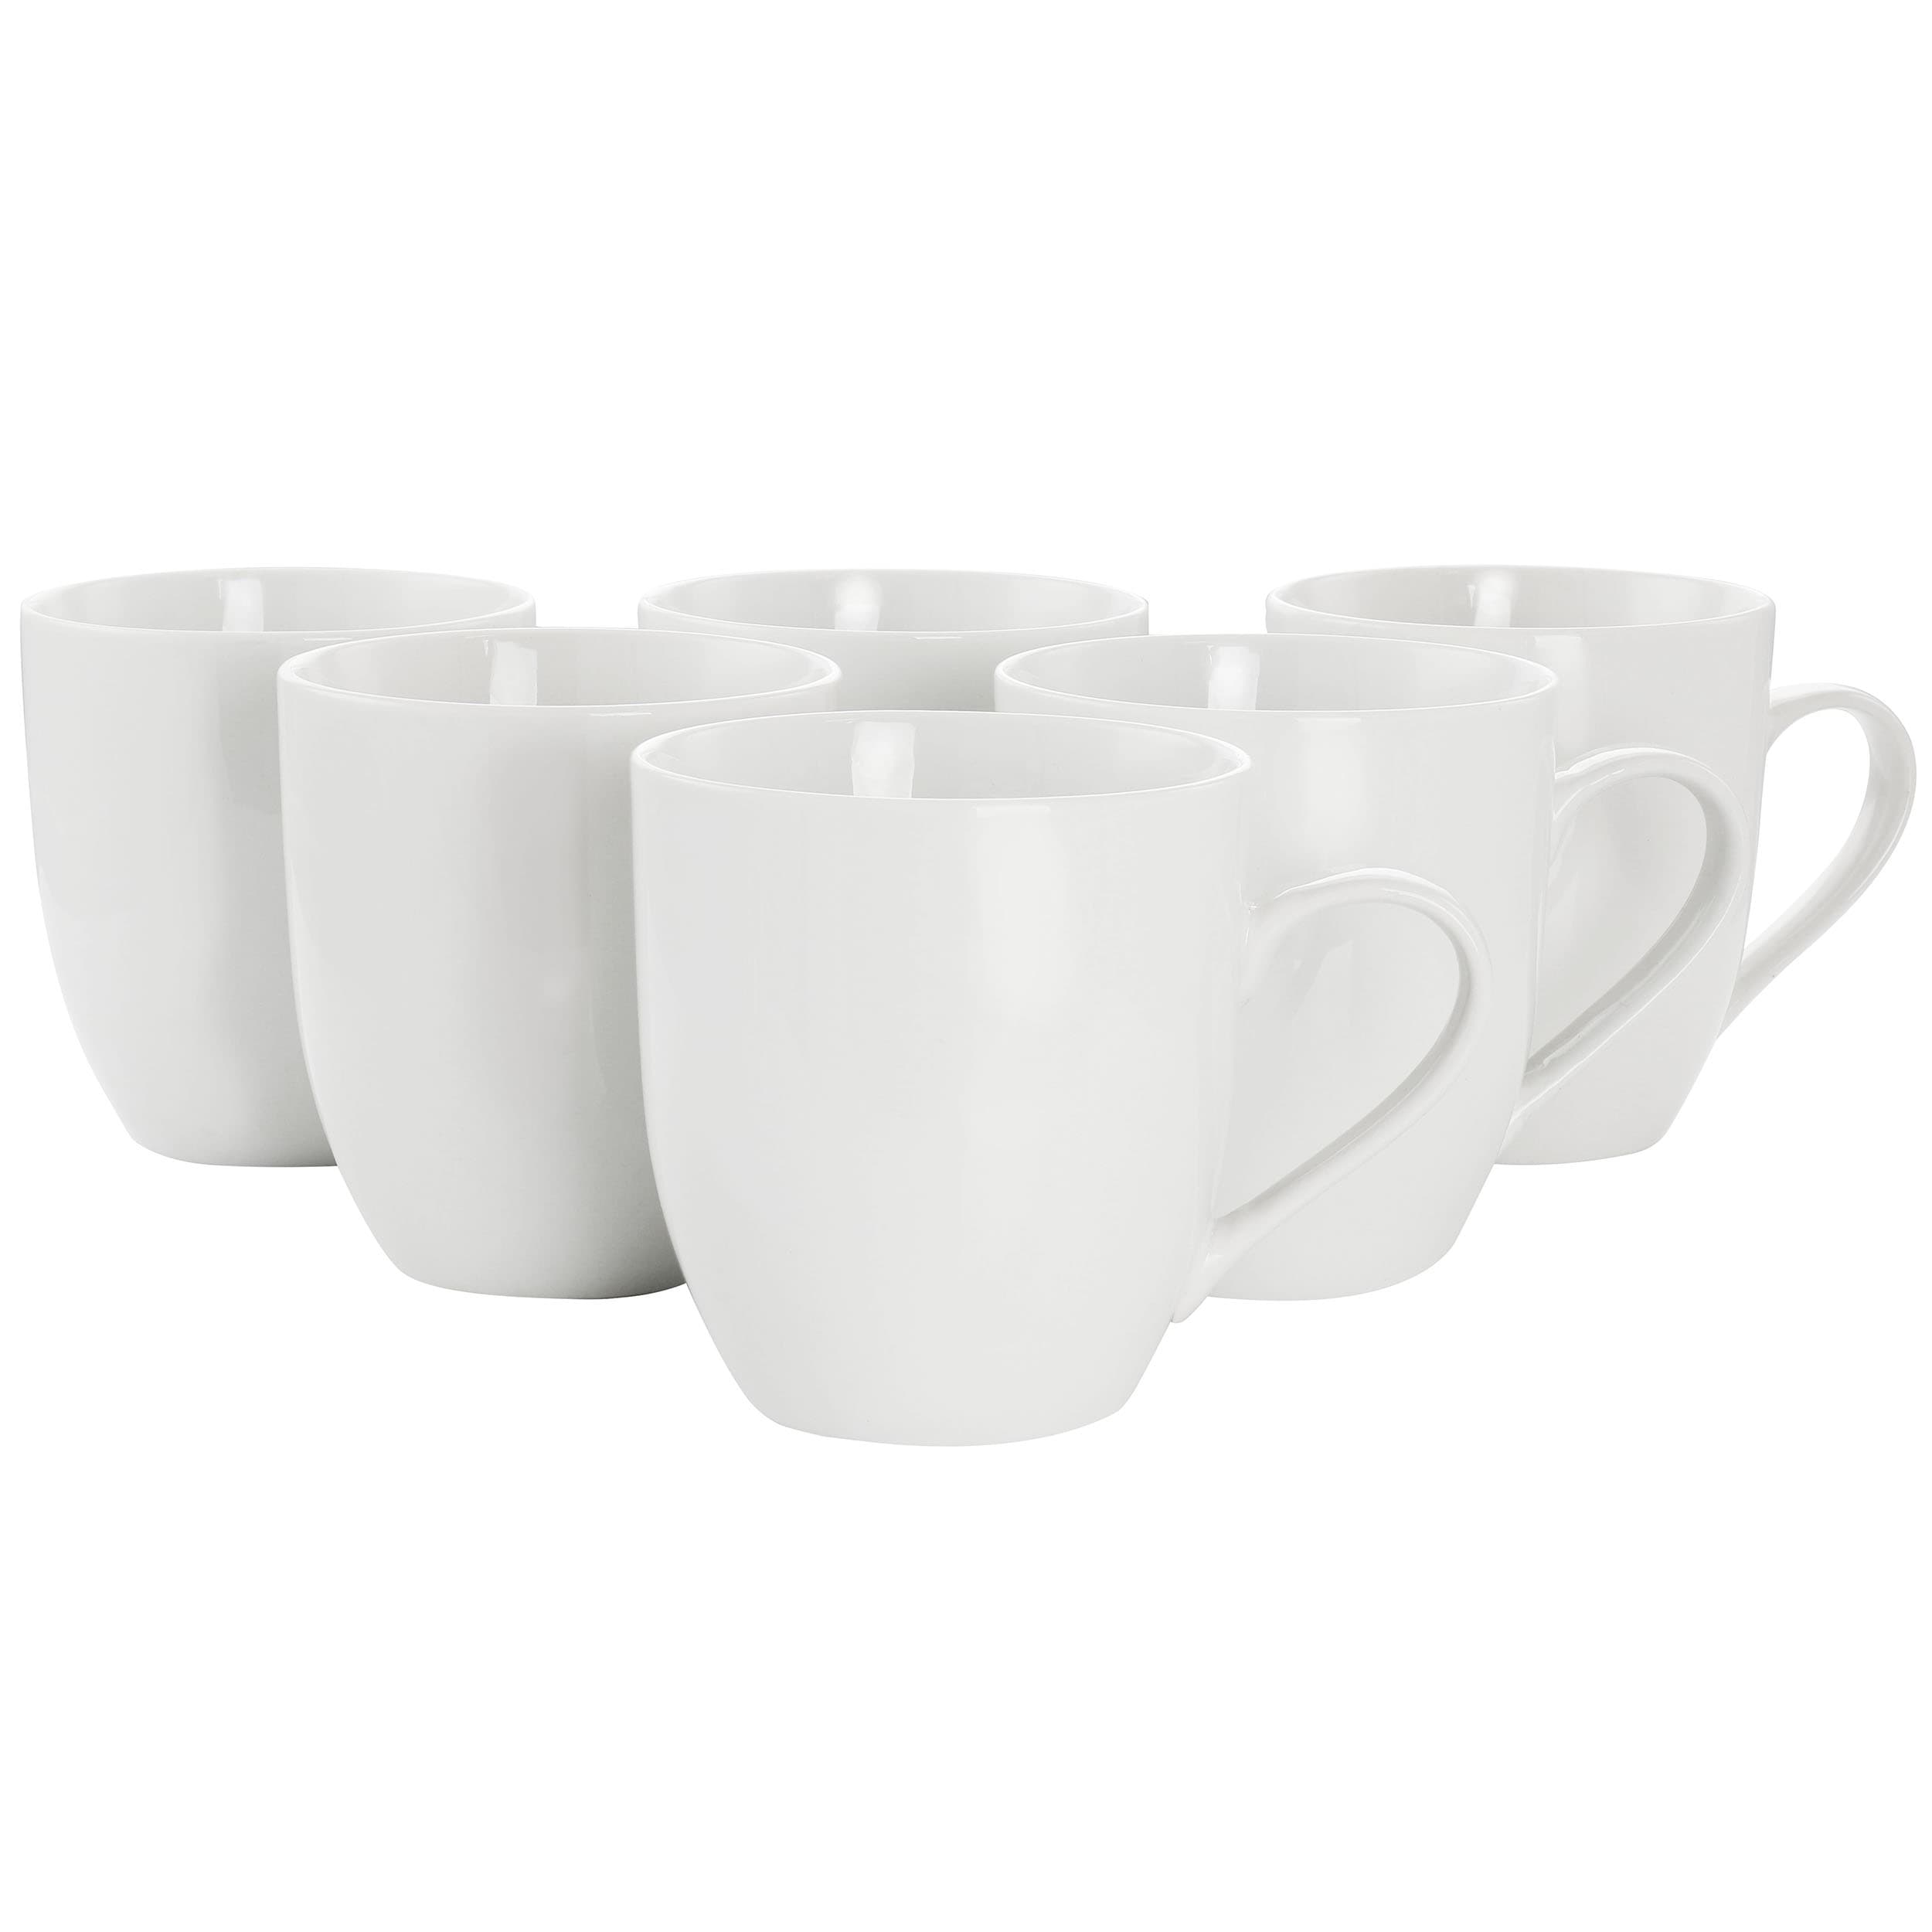 Cup set - Buy Ceramic Textured Coffee Cup Set of 6 Online